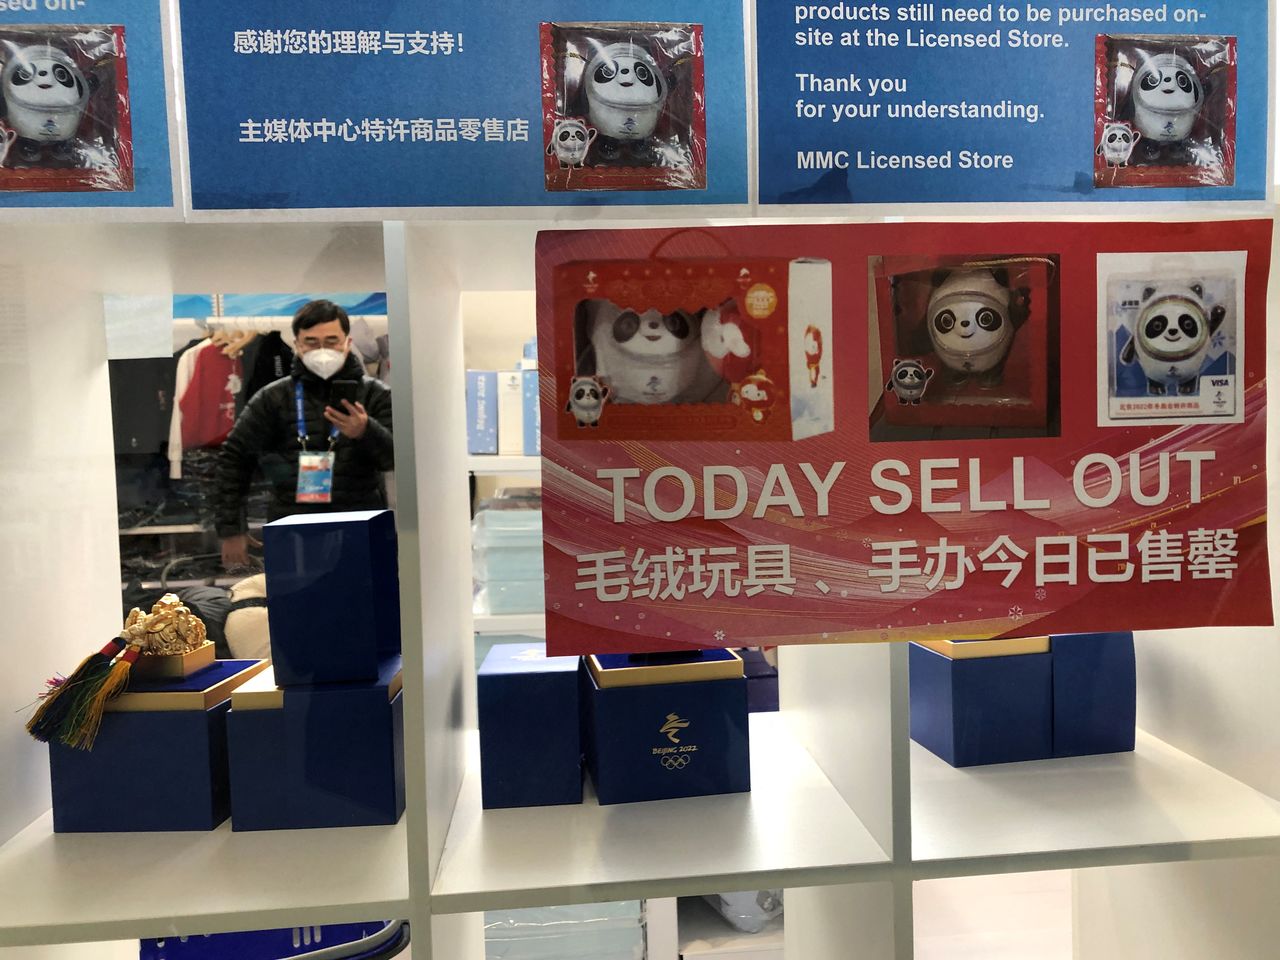 A sign shows a sell out on the Bing Dwen Dwen mascot merchandise, at the 2022 Beijing Olympics media center in Beijing, China, February 13, 2022. REUTERS/Jonathan Ernst